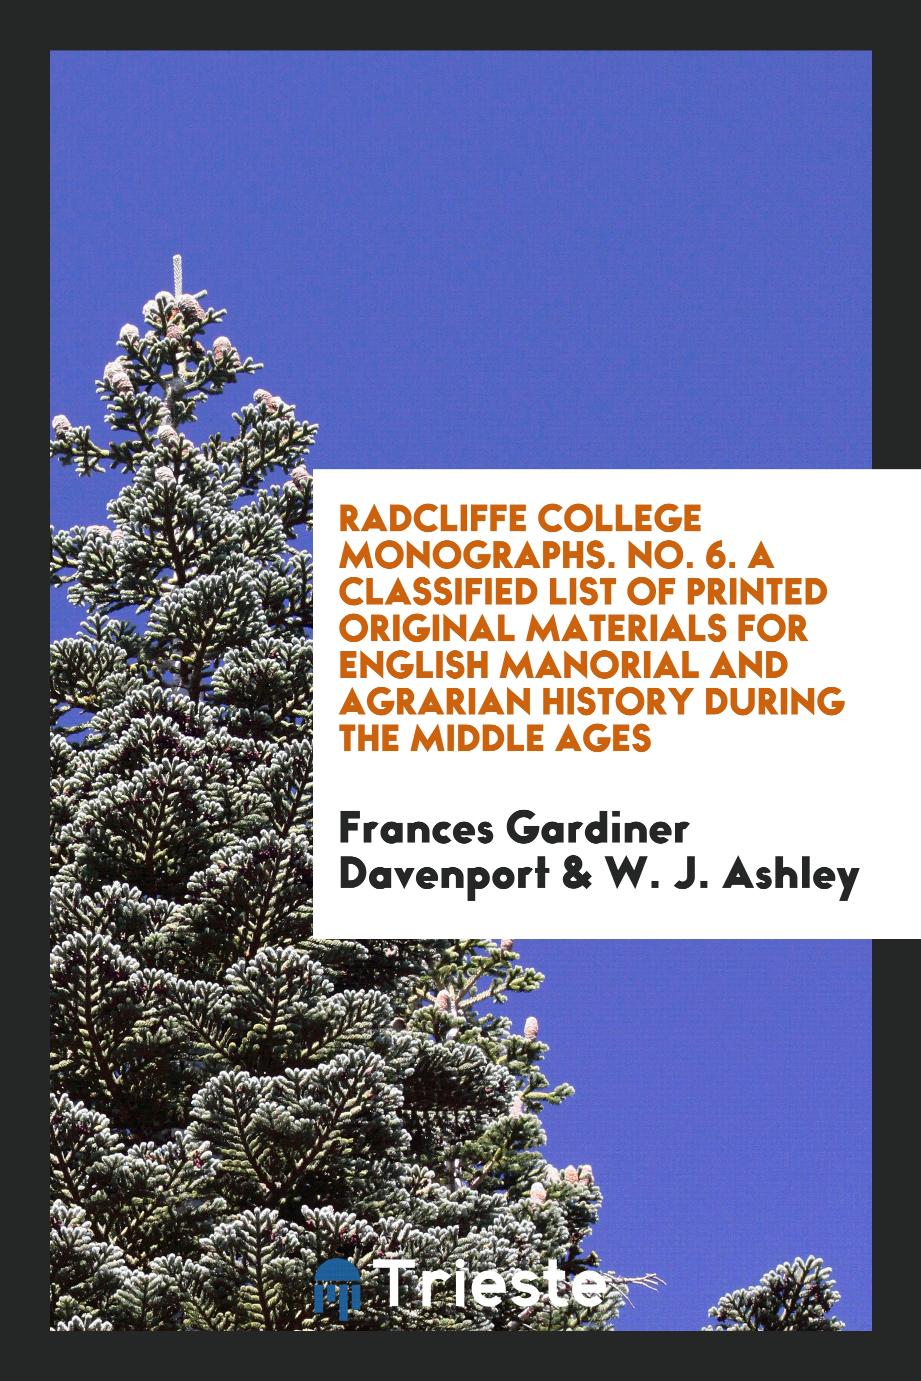 Radcliffe College Monographs. No. 6. A Classified List of Printed Original Materials for English Manorial and Agrarian history during the middle ages